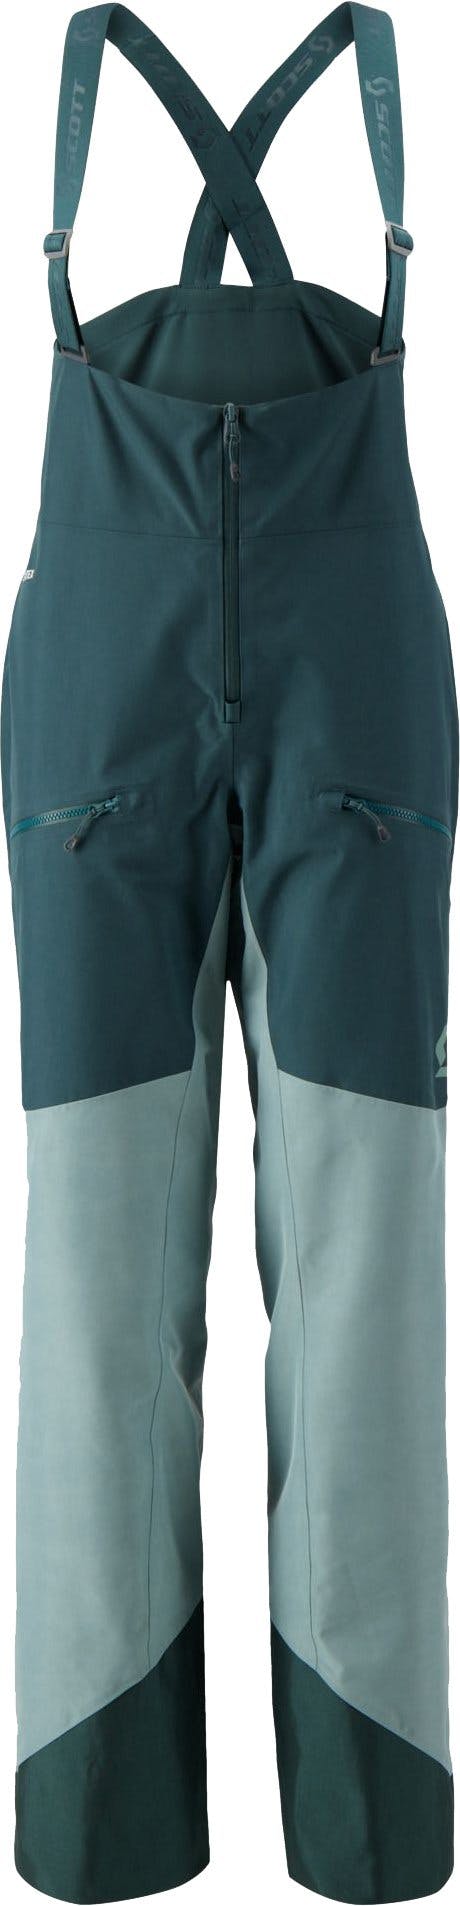 Product image for Vertic GORE-TEX 2 Layer Pant - Women's